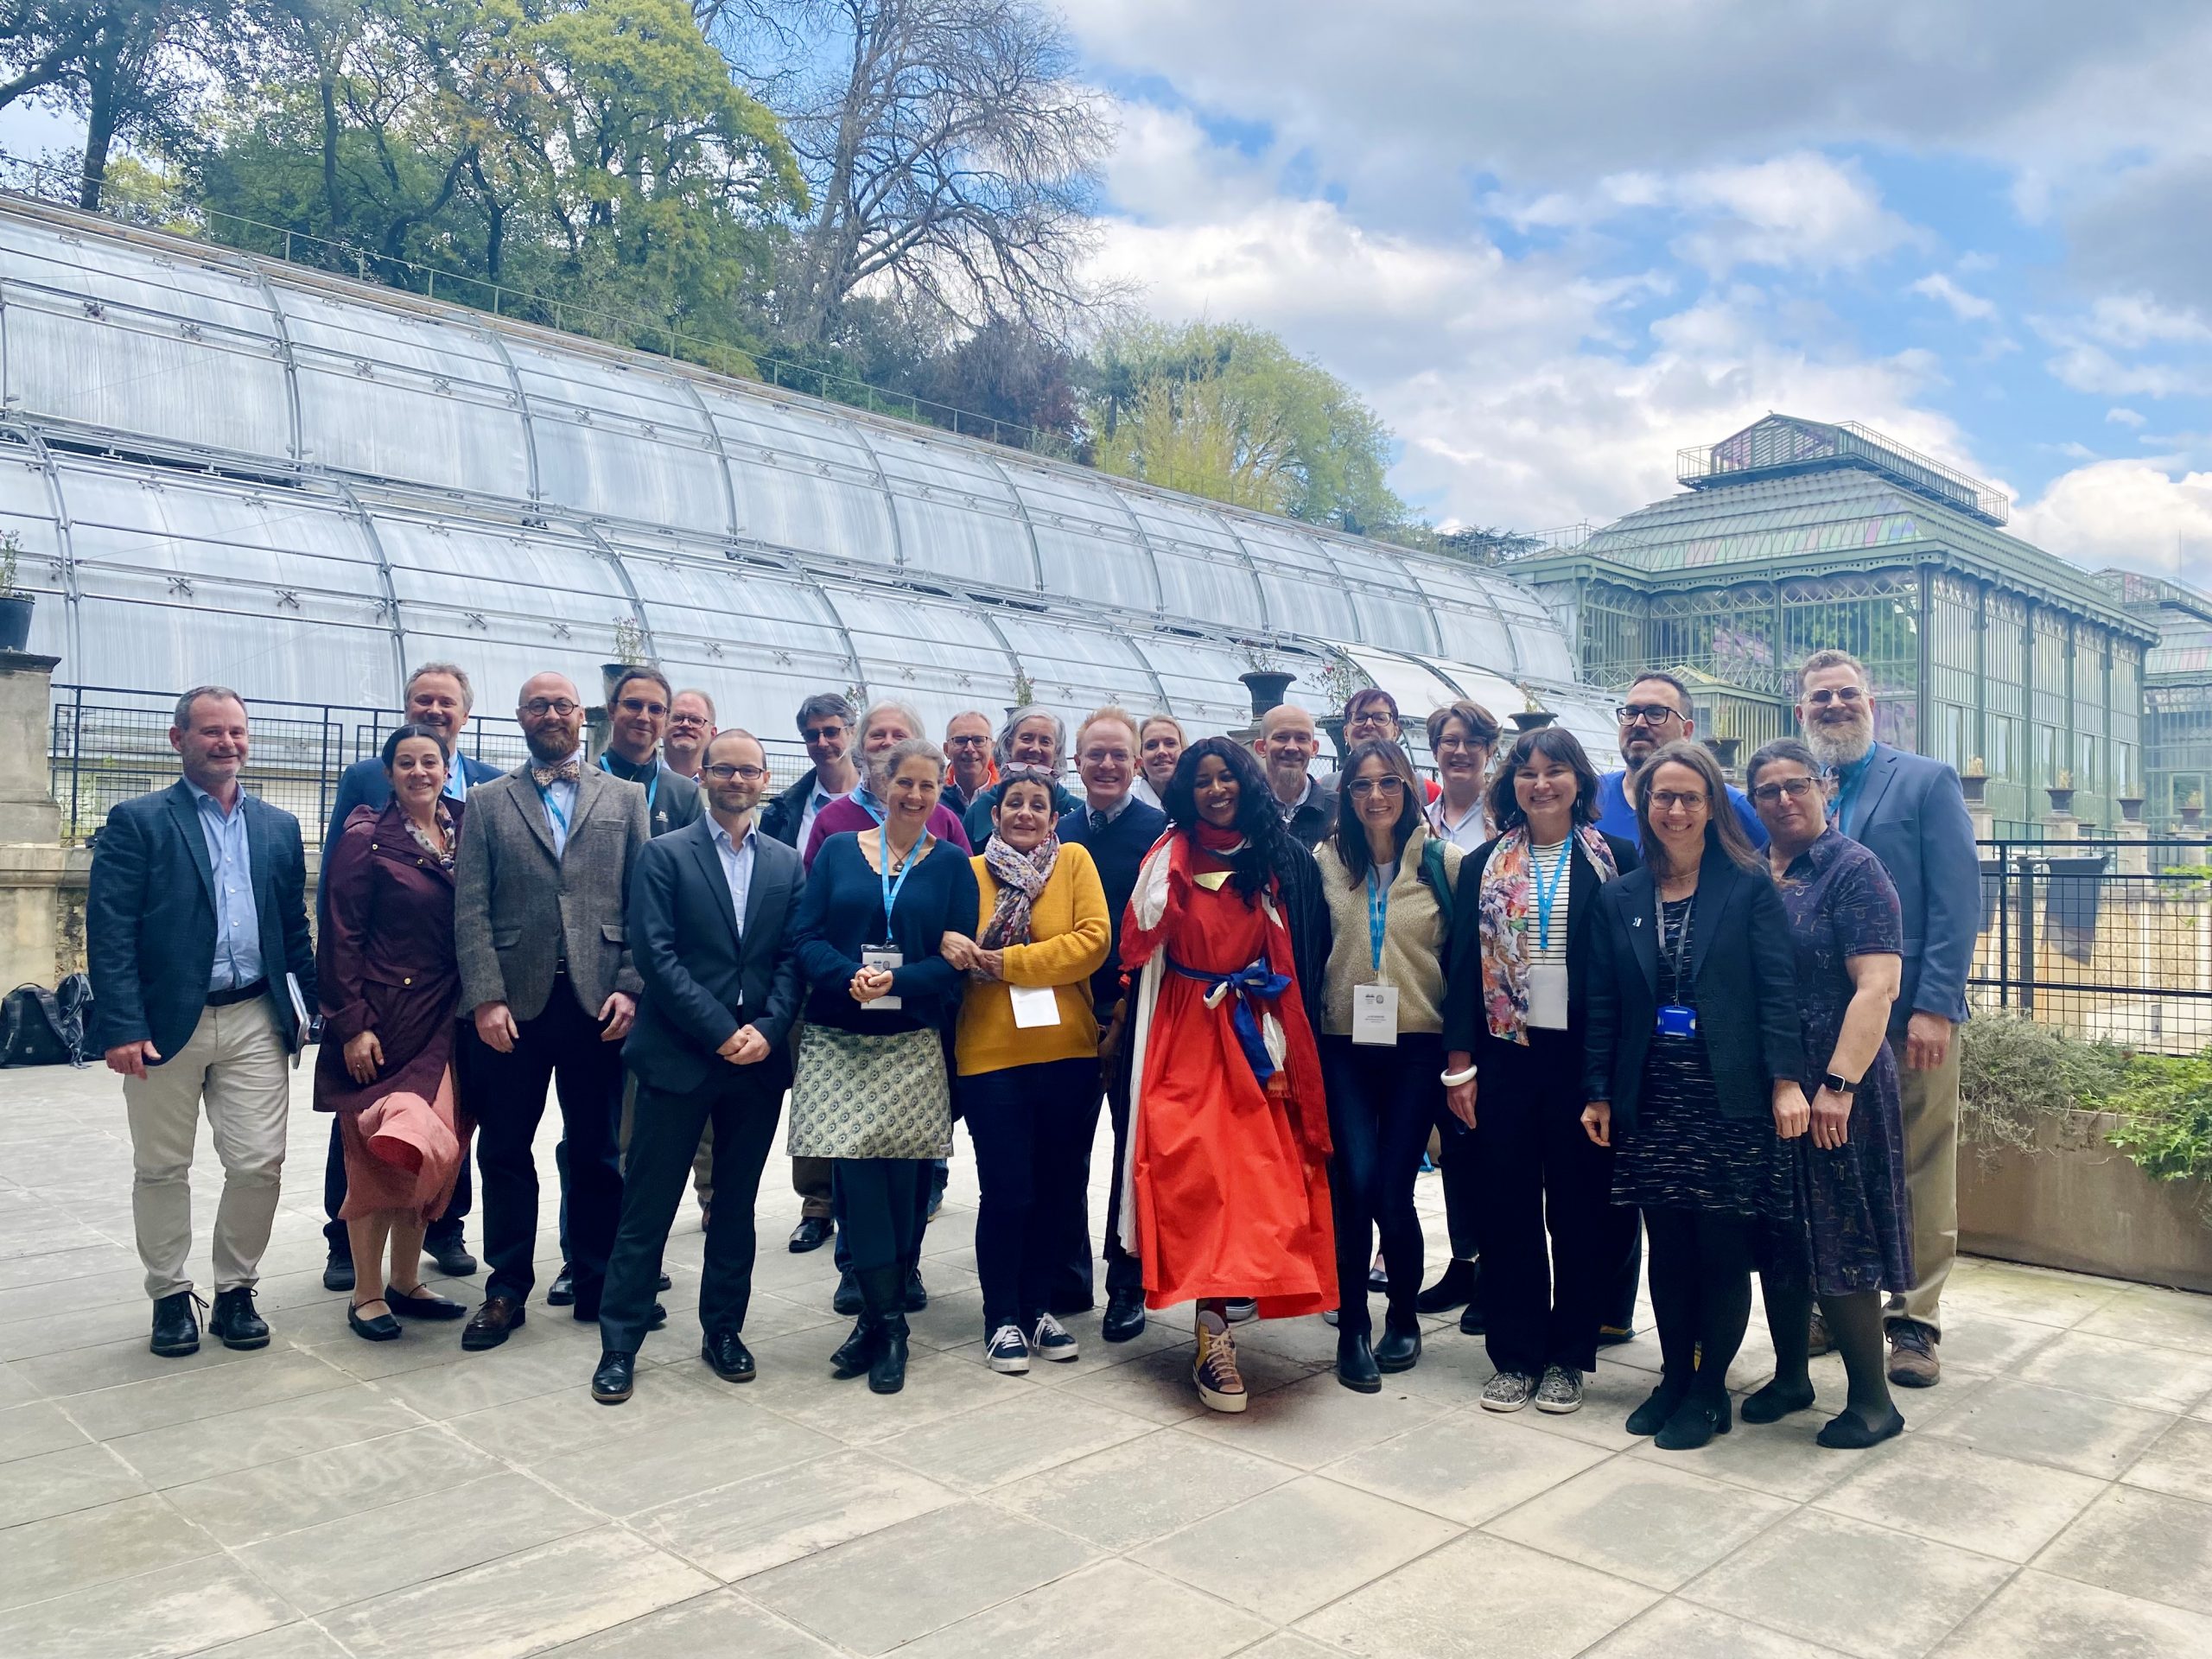 Attendees of the Biodiversity Heritage Library annual meeting pose for a group photo in front of the greenhouses in Jardin des Plantes